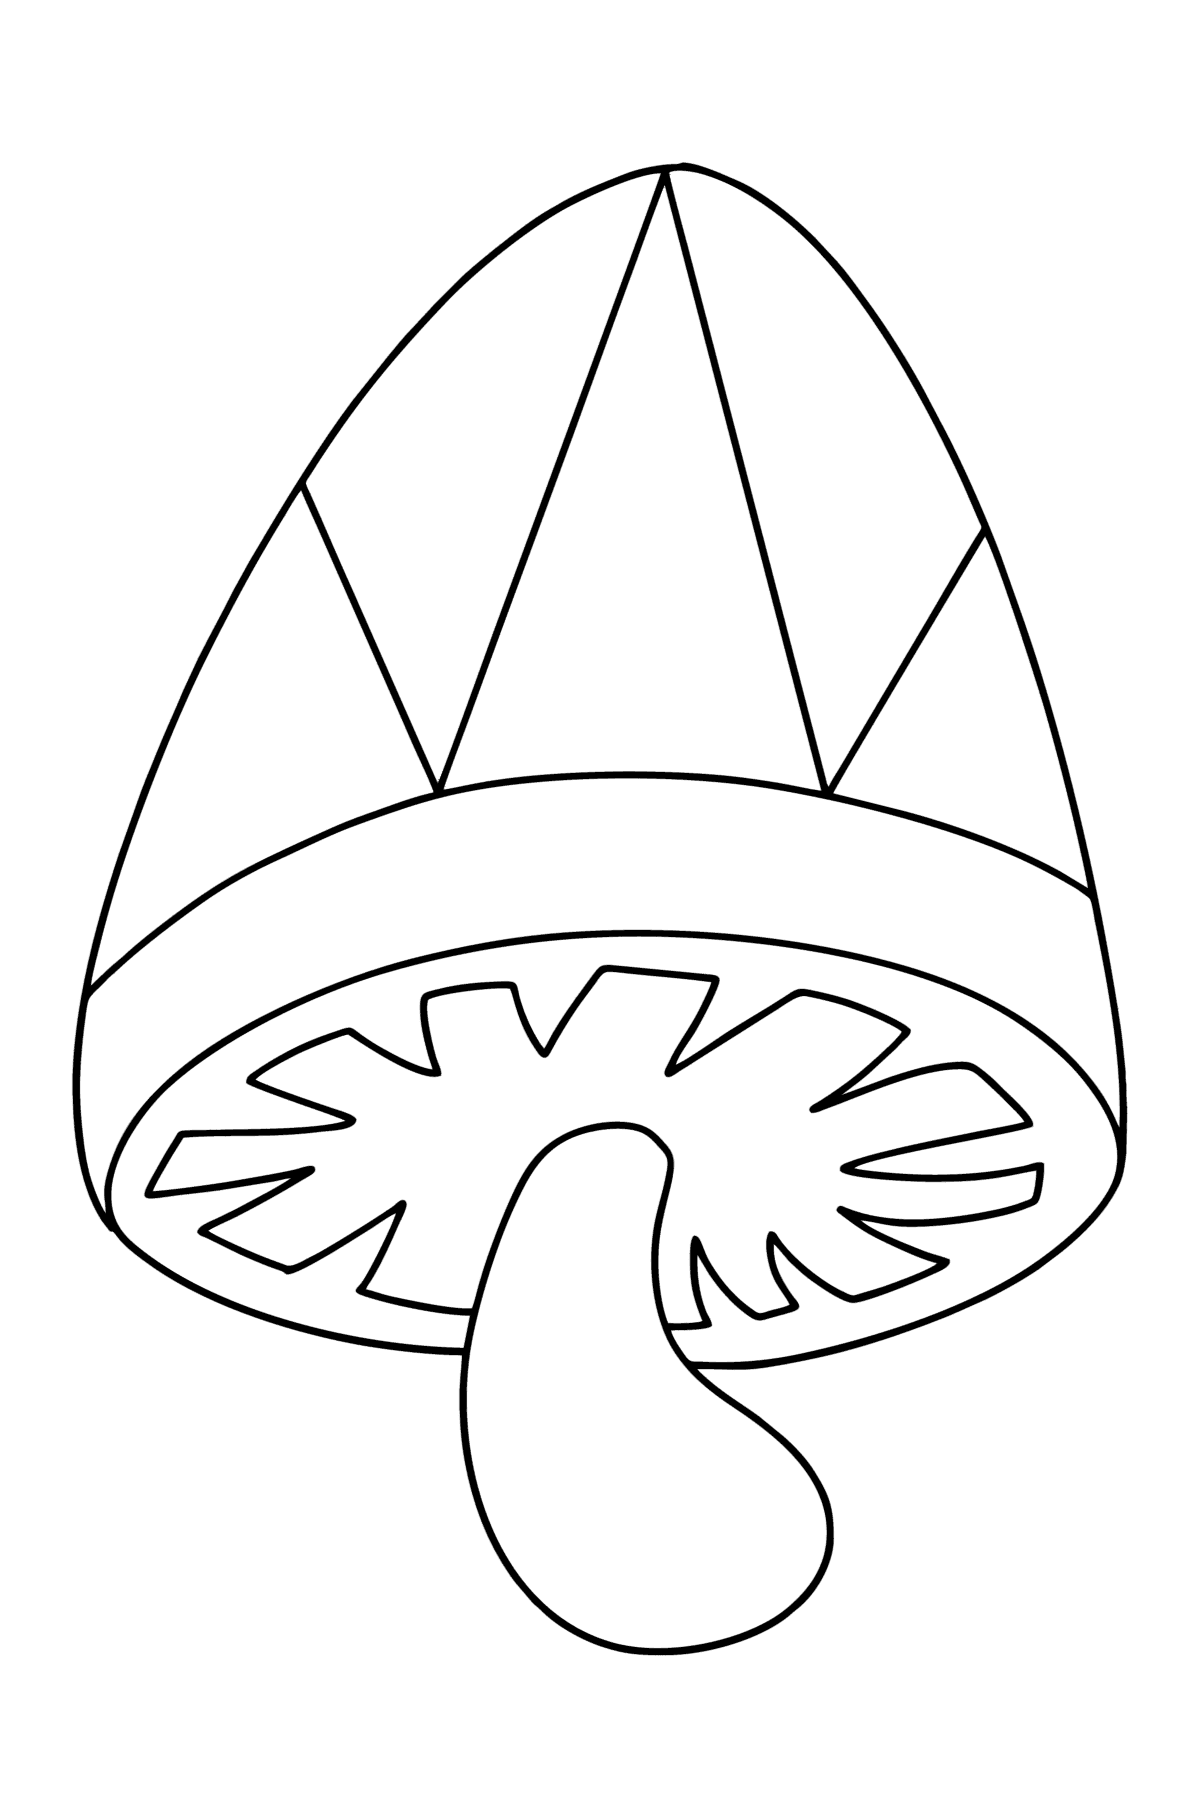 Simple Zen mushroom coloring page - Coloring Pages for Kids